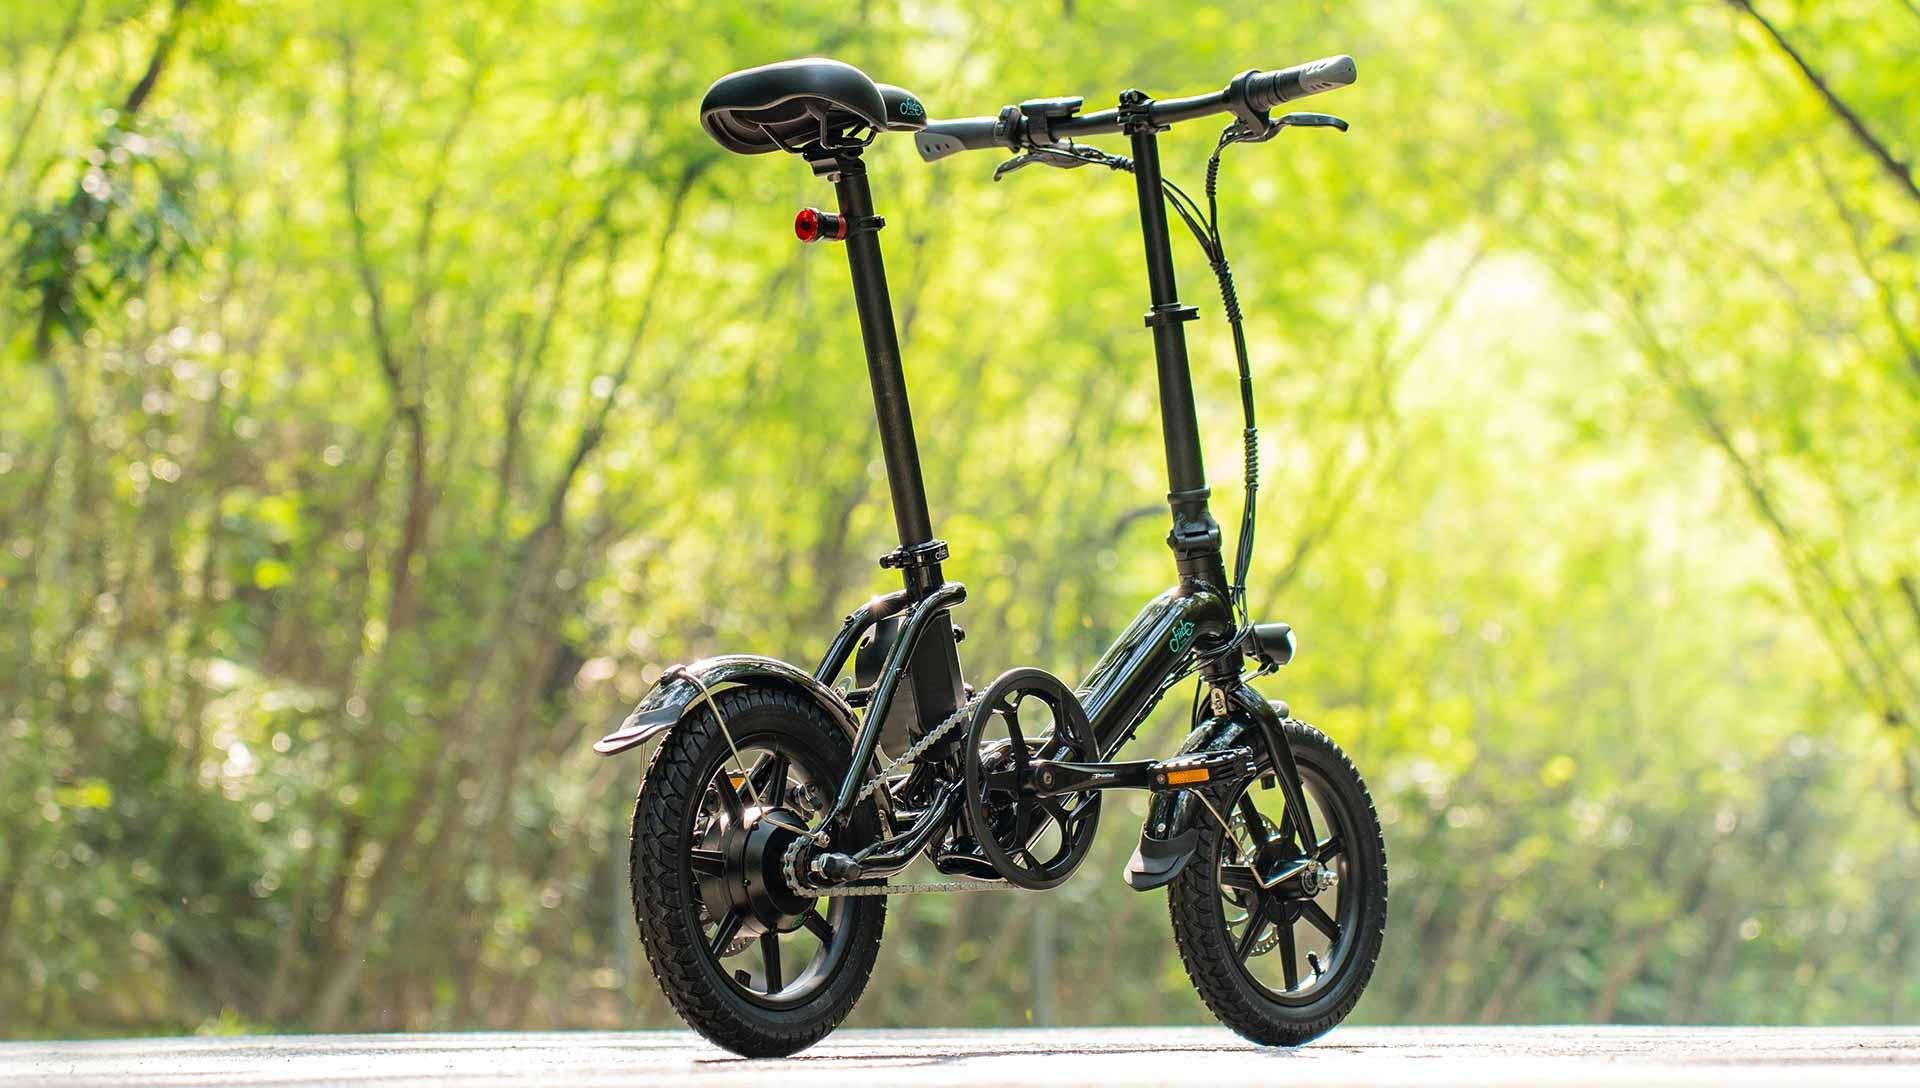 FIIDO D3 PRO Electric Bike with mudguard and light - Pogo Cycles available in cycle to work